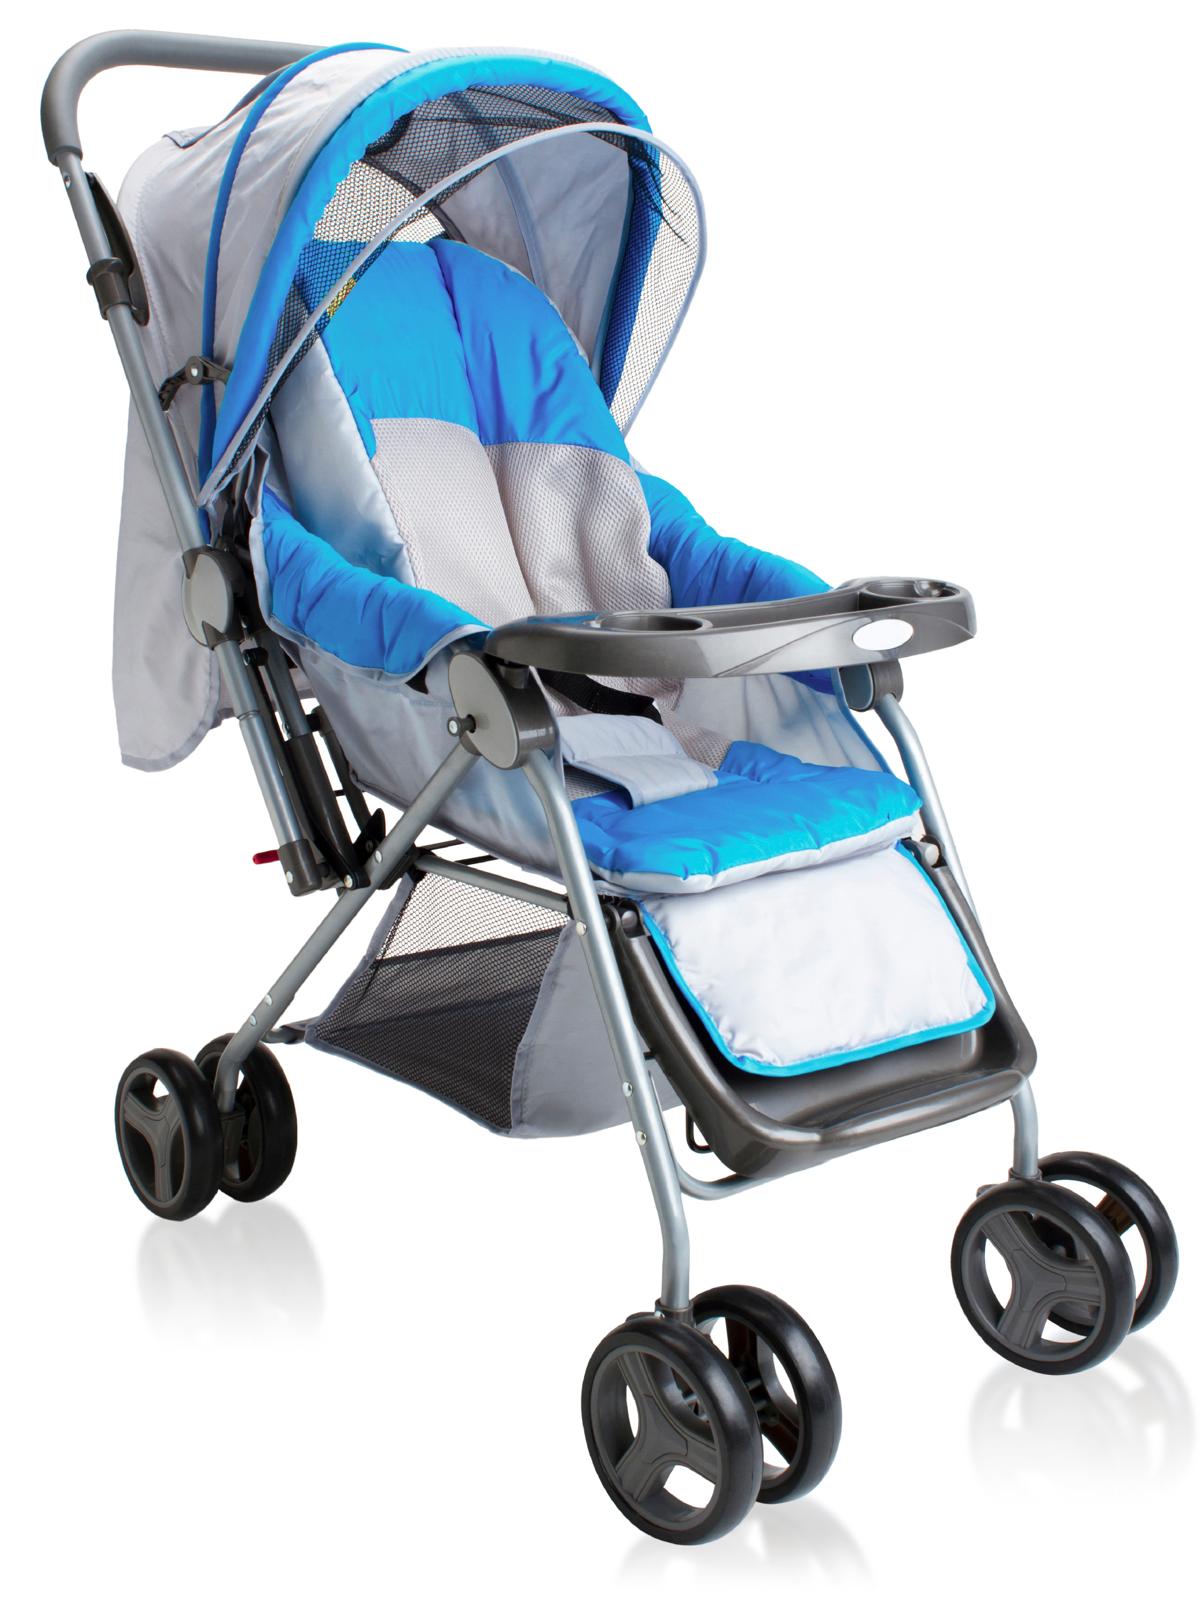 what is difference between stroller and pram